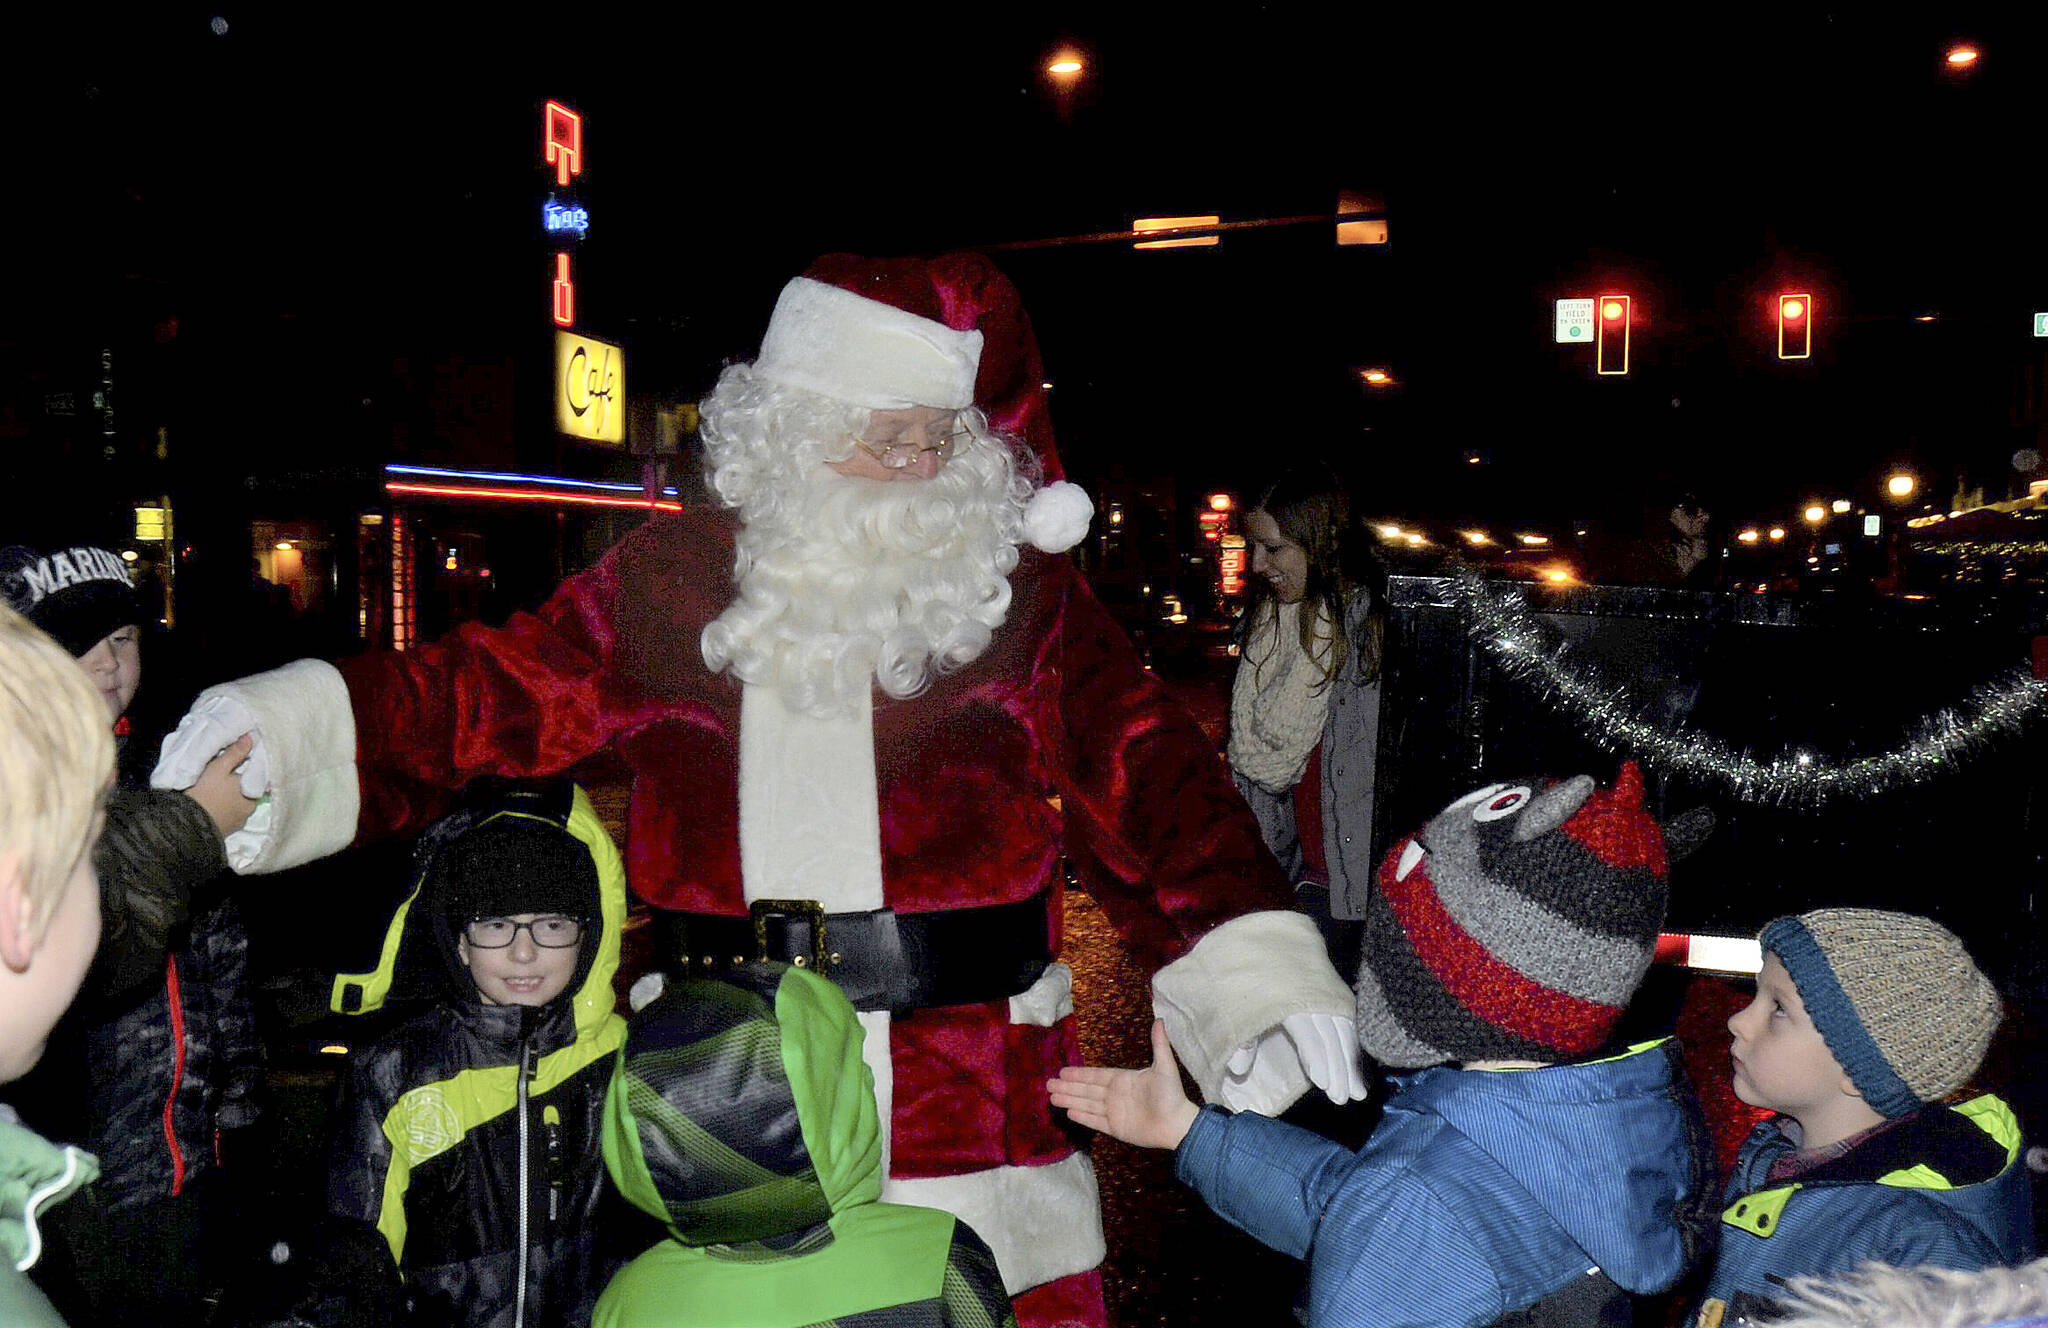 Courtesy photo.
Santa greets excited children in downtown North Bend.